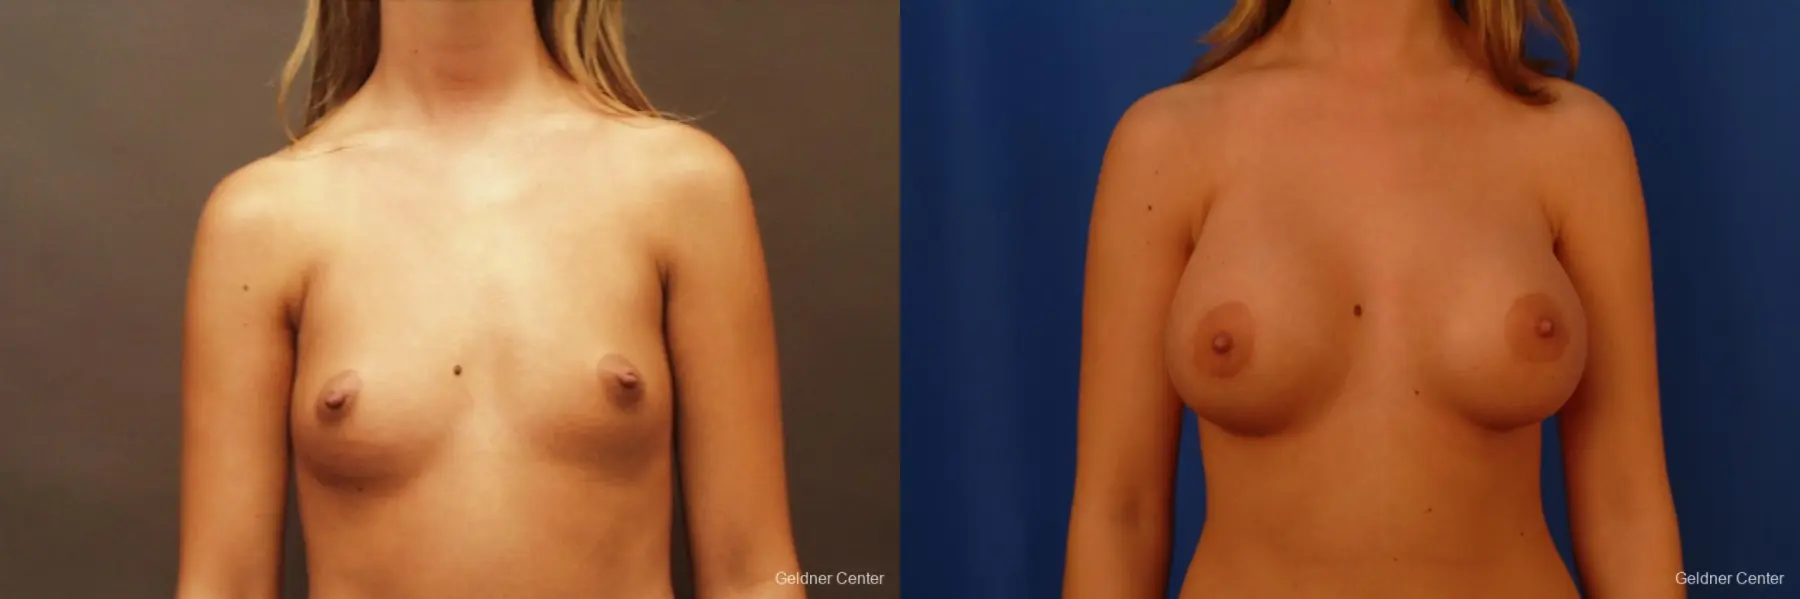 Breast Augmentation Lake Shore Dr, Chicago 2533 - Before and After 1